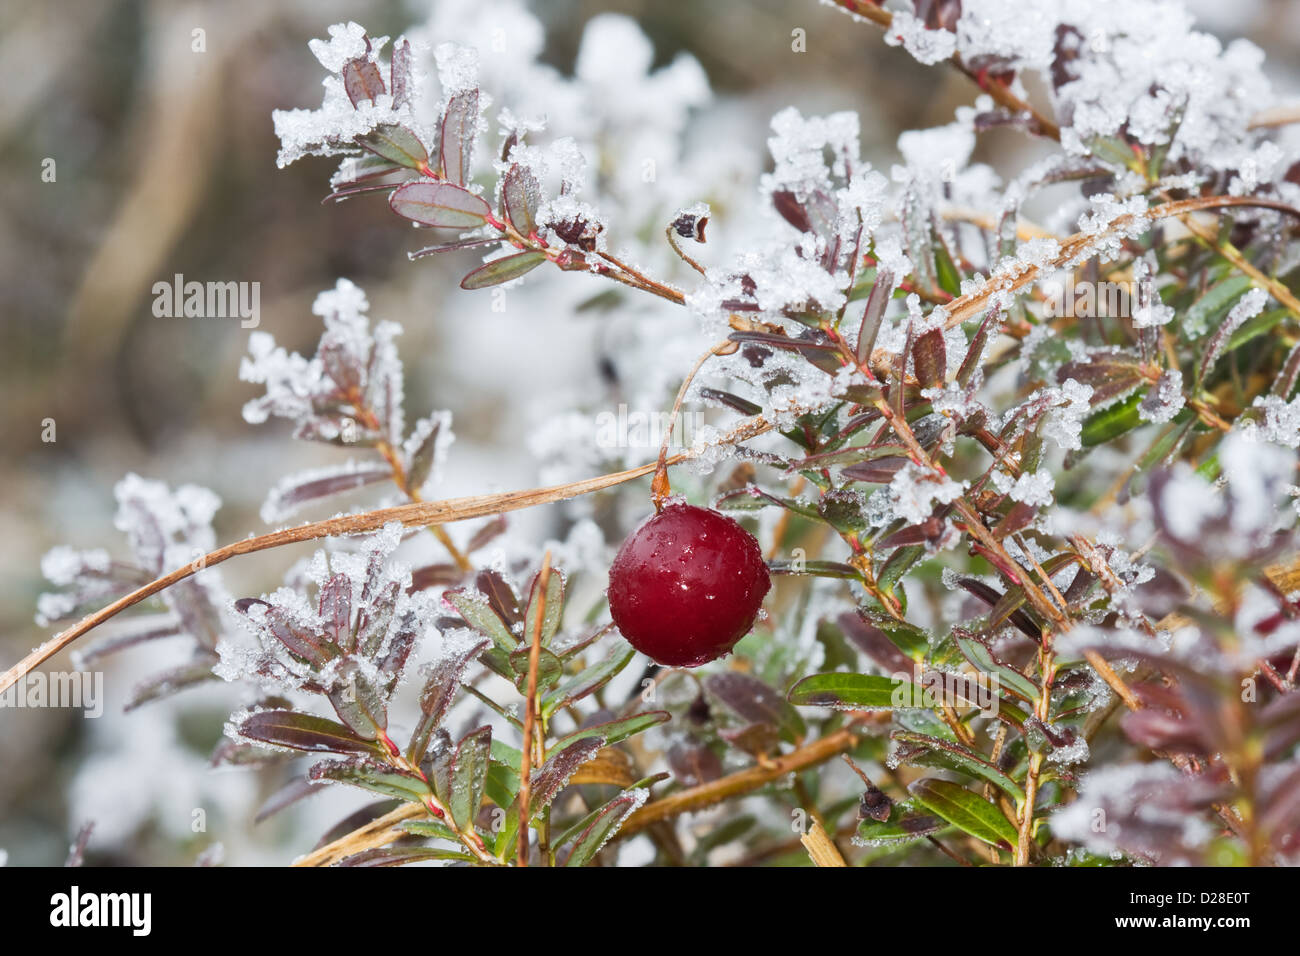 Cranberry in winter on a plant, covered with snow Stock Photo